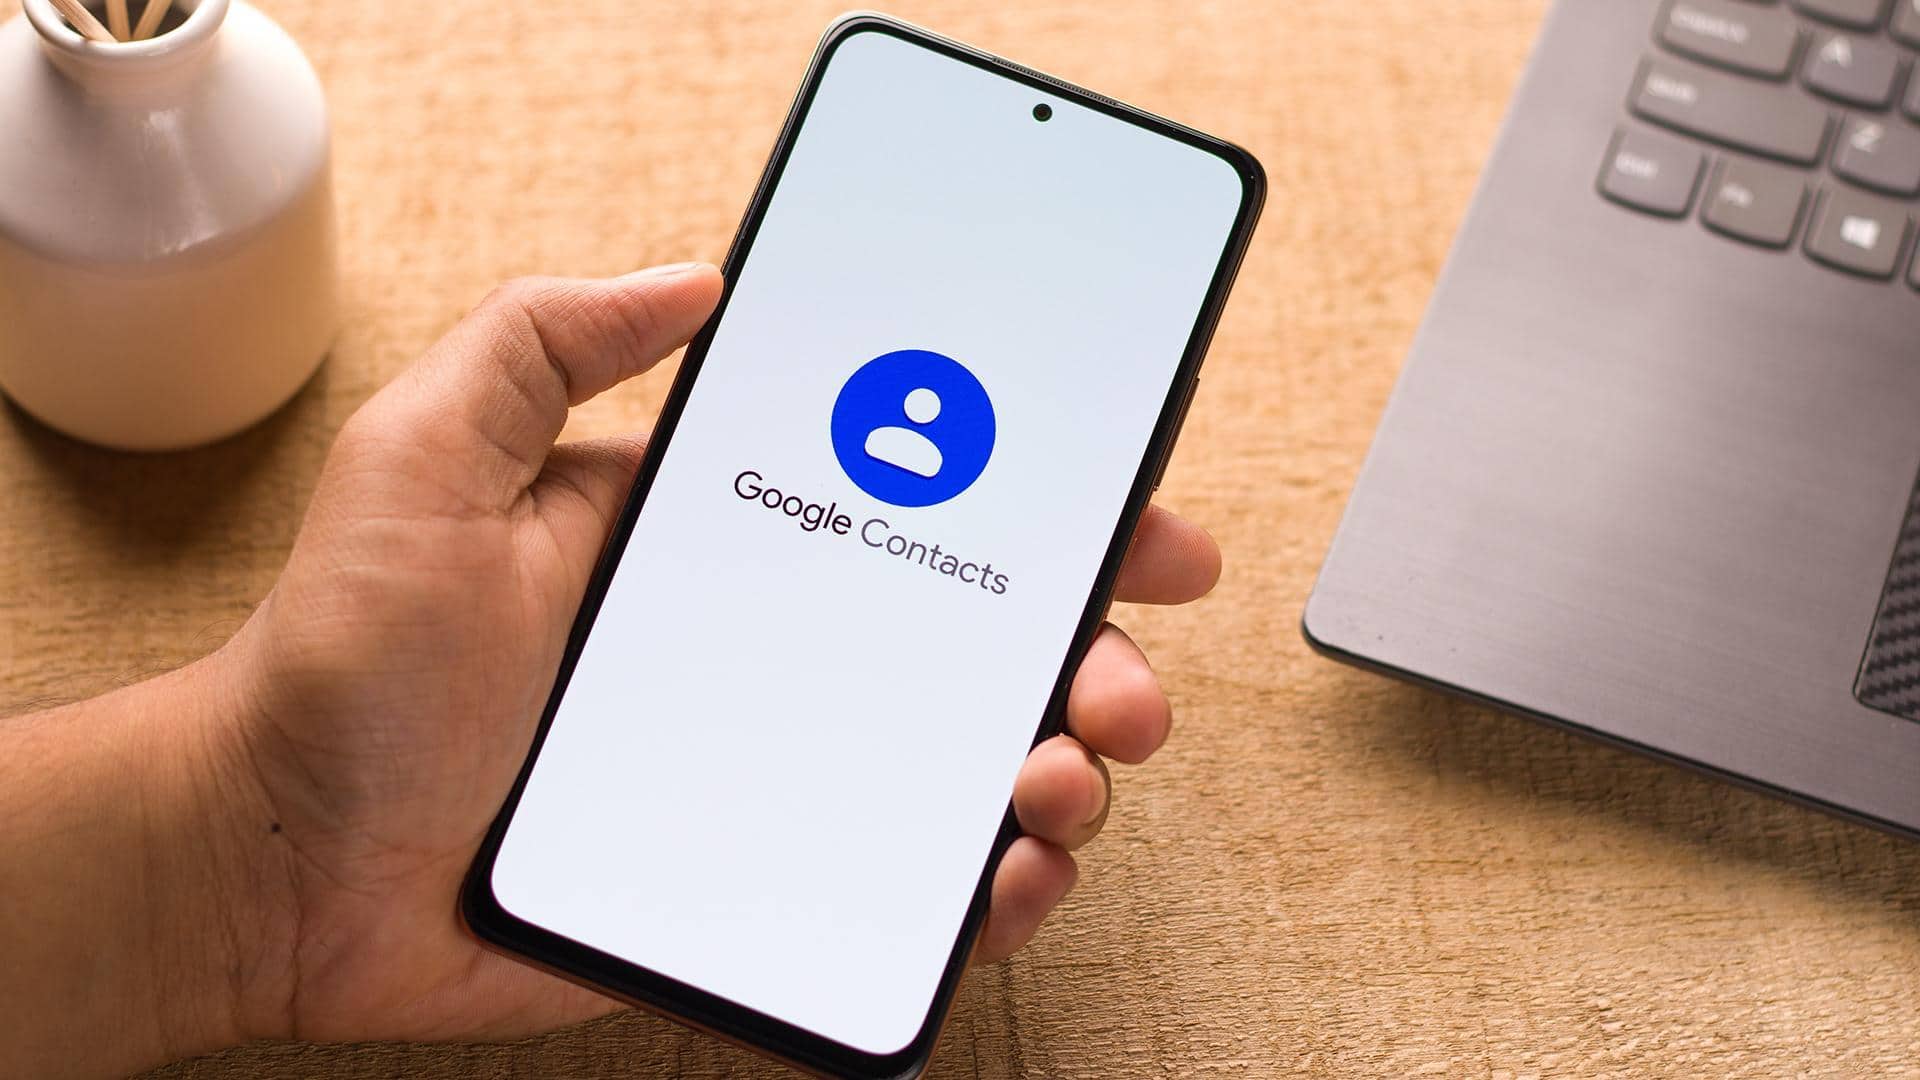 Google Contacts integrates live location sharing: How to use it